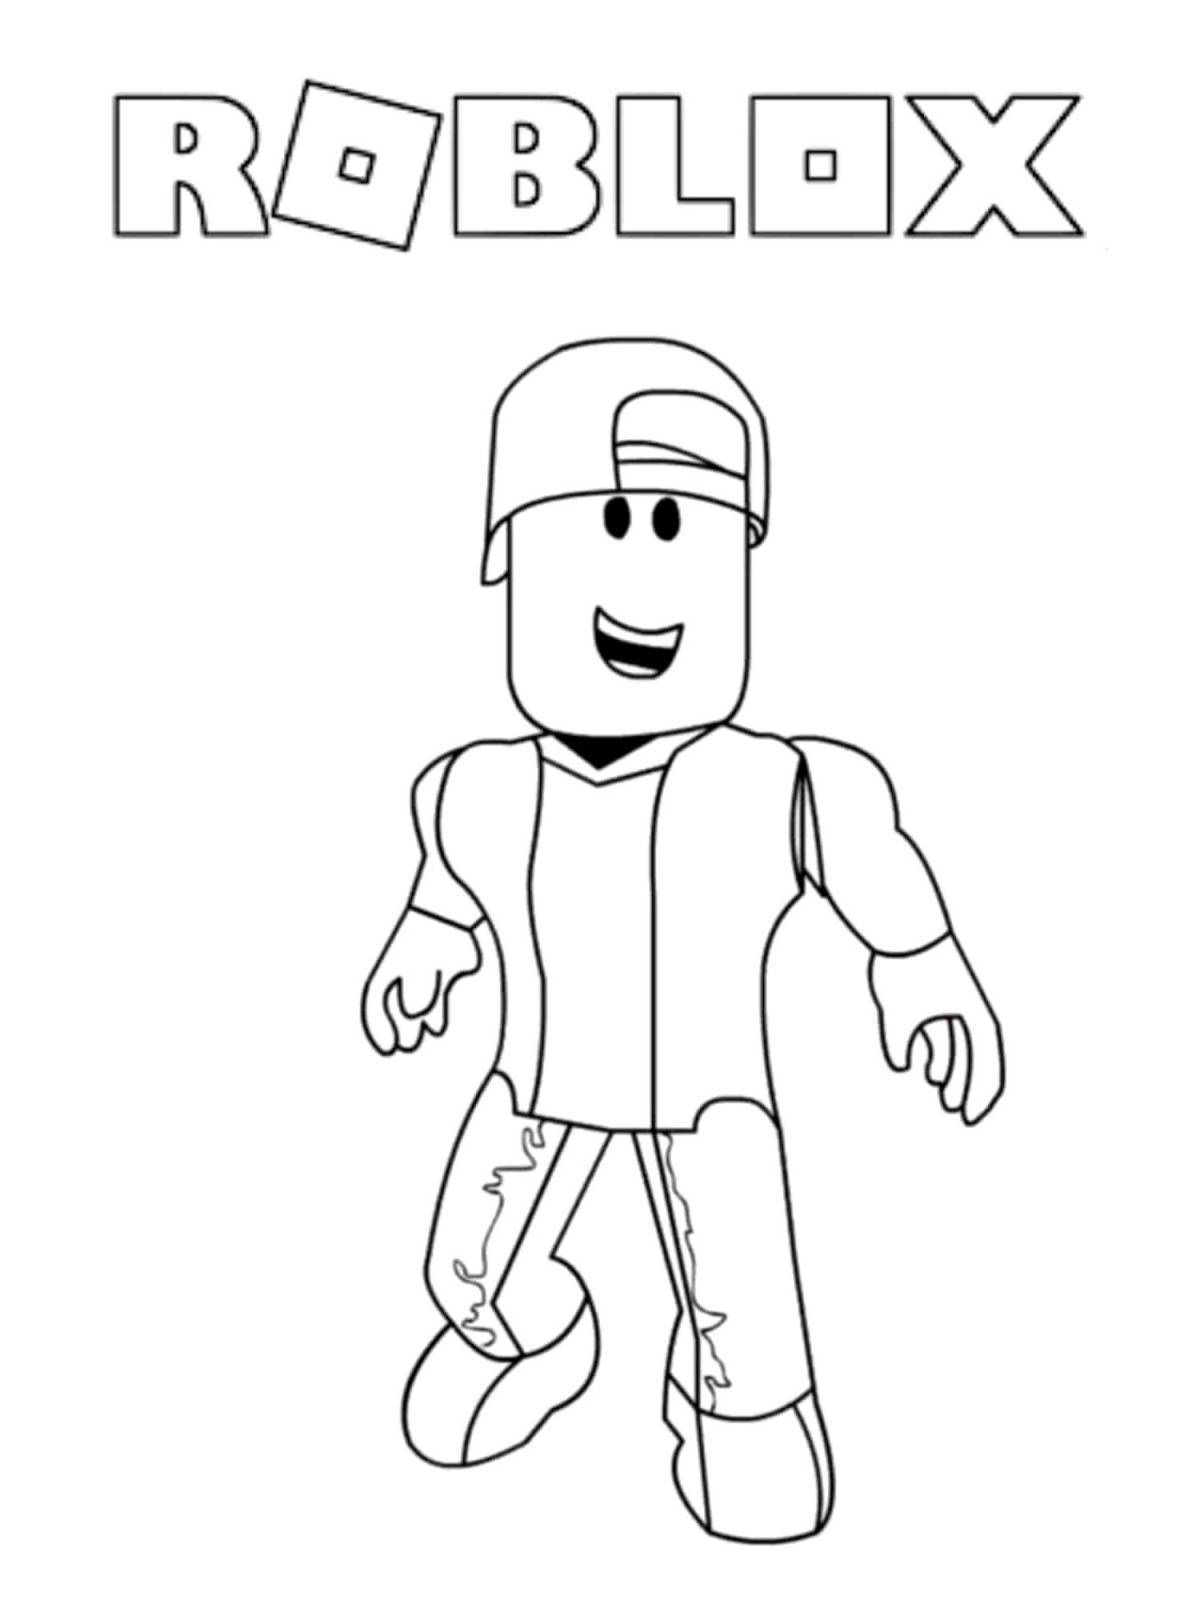 Roblox for kids #1